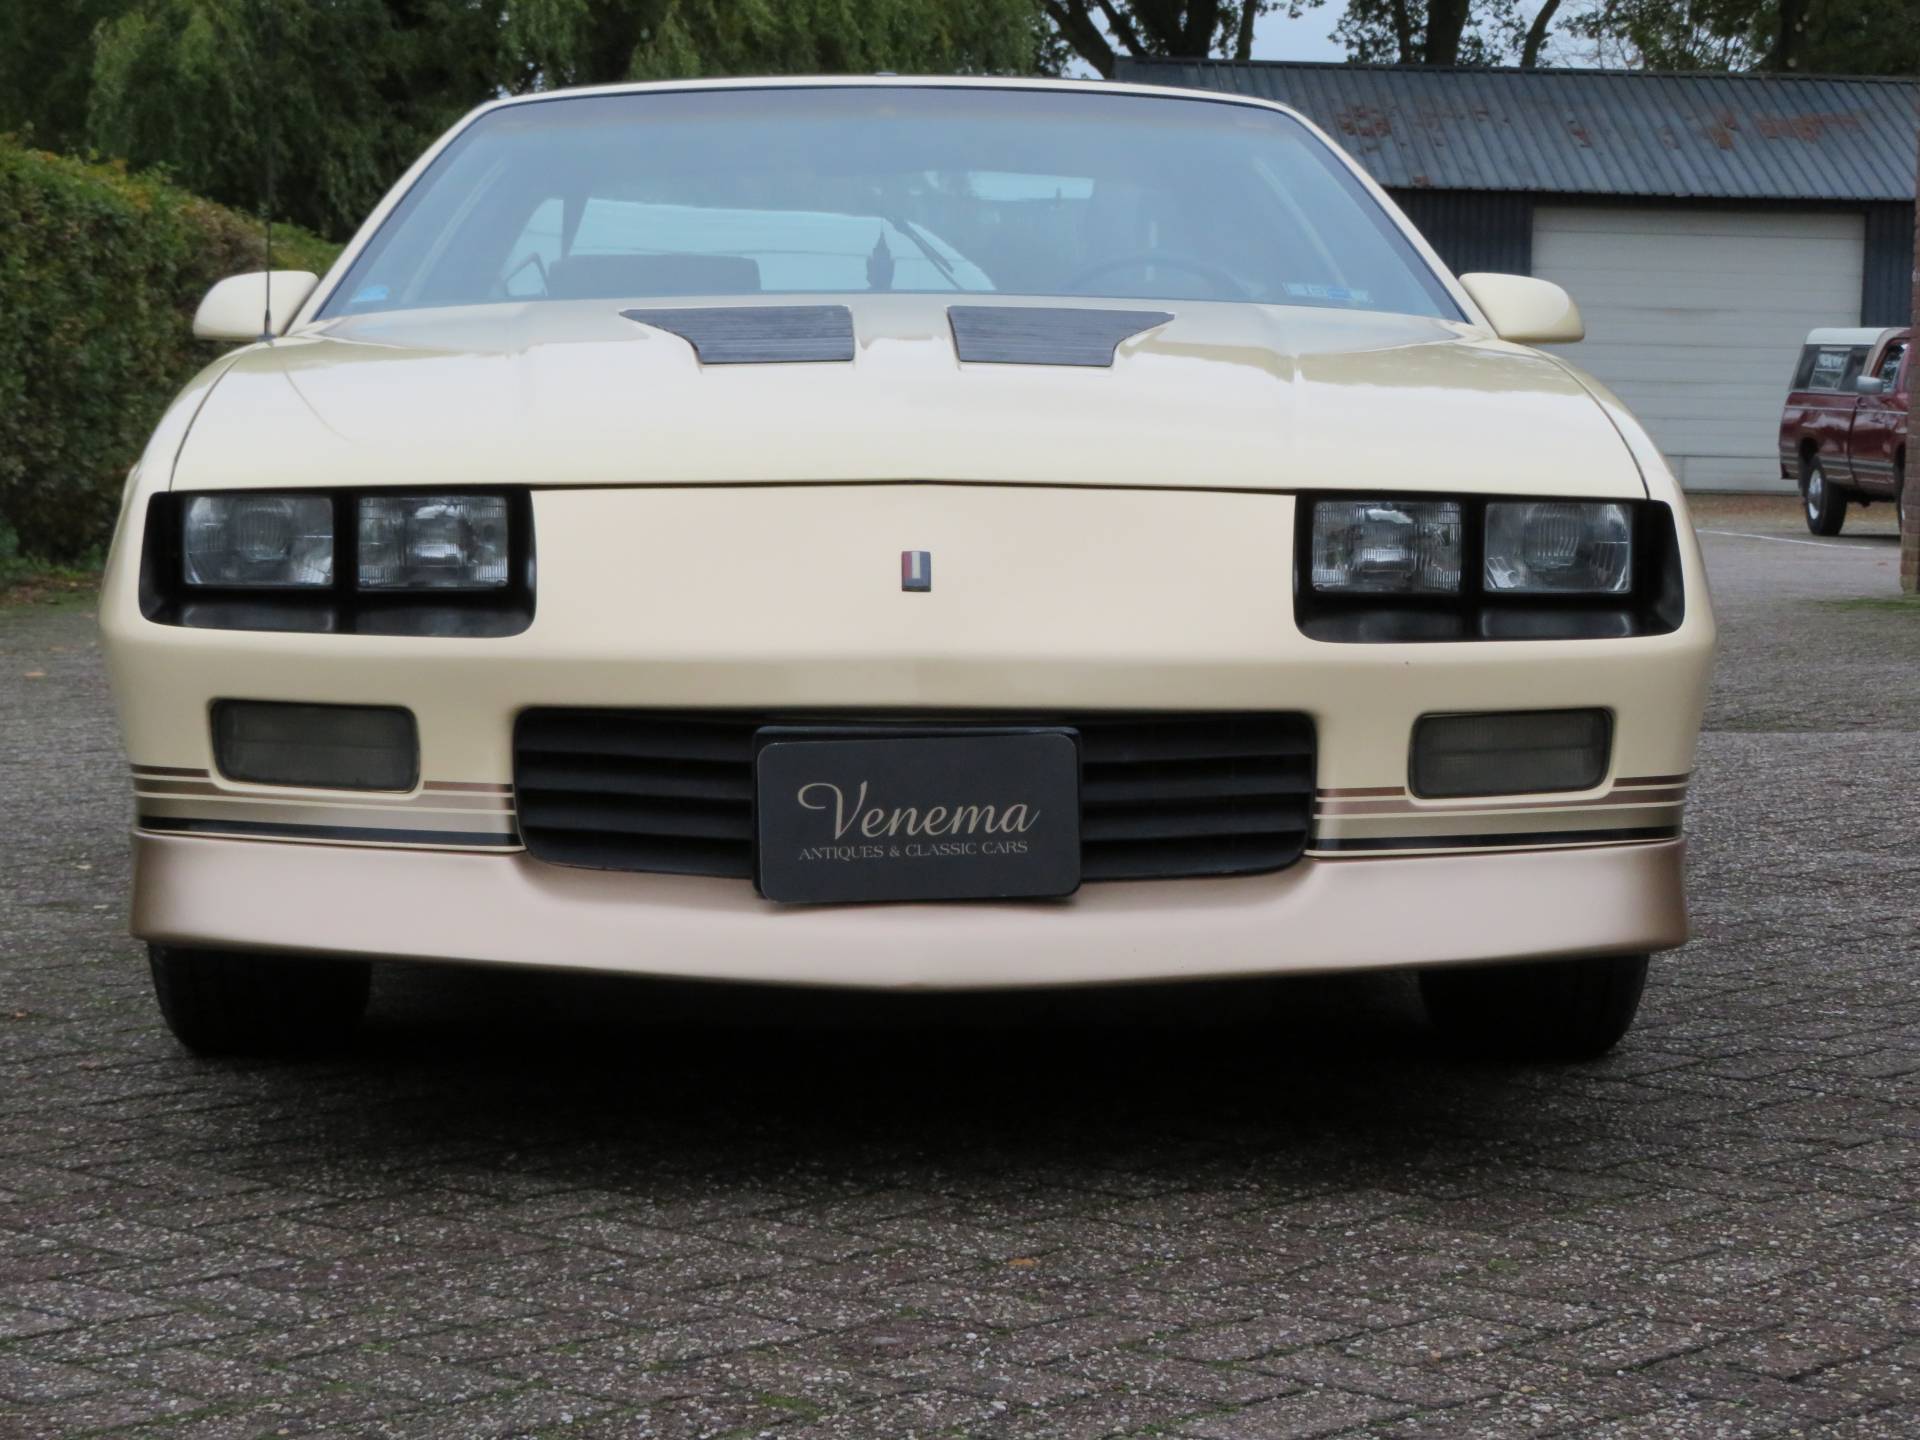 For Sale: Chevrolet Camaro Z28 (1985) offered for £14,677